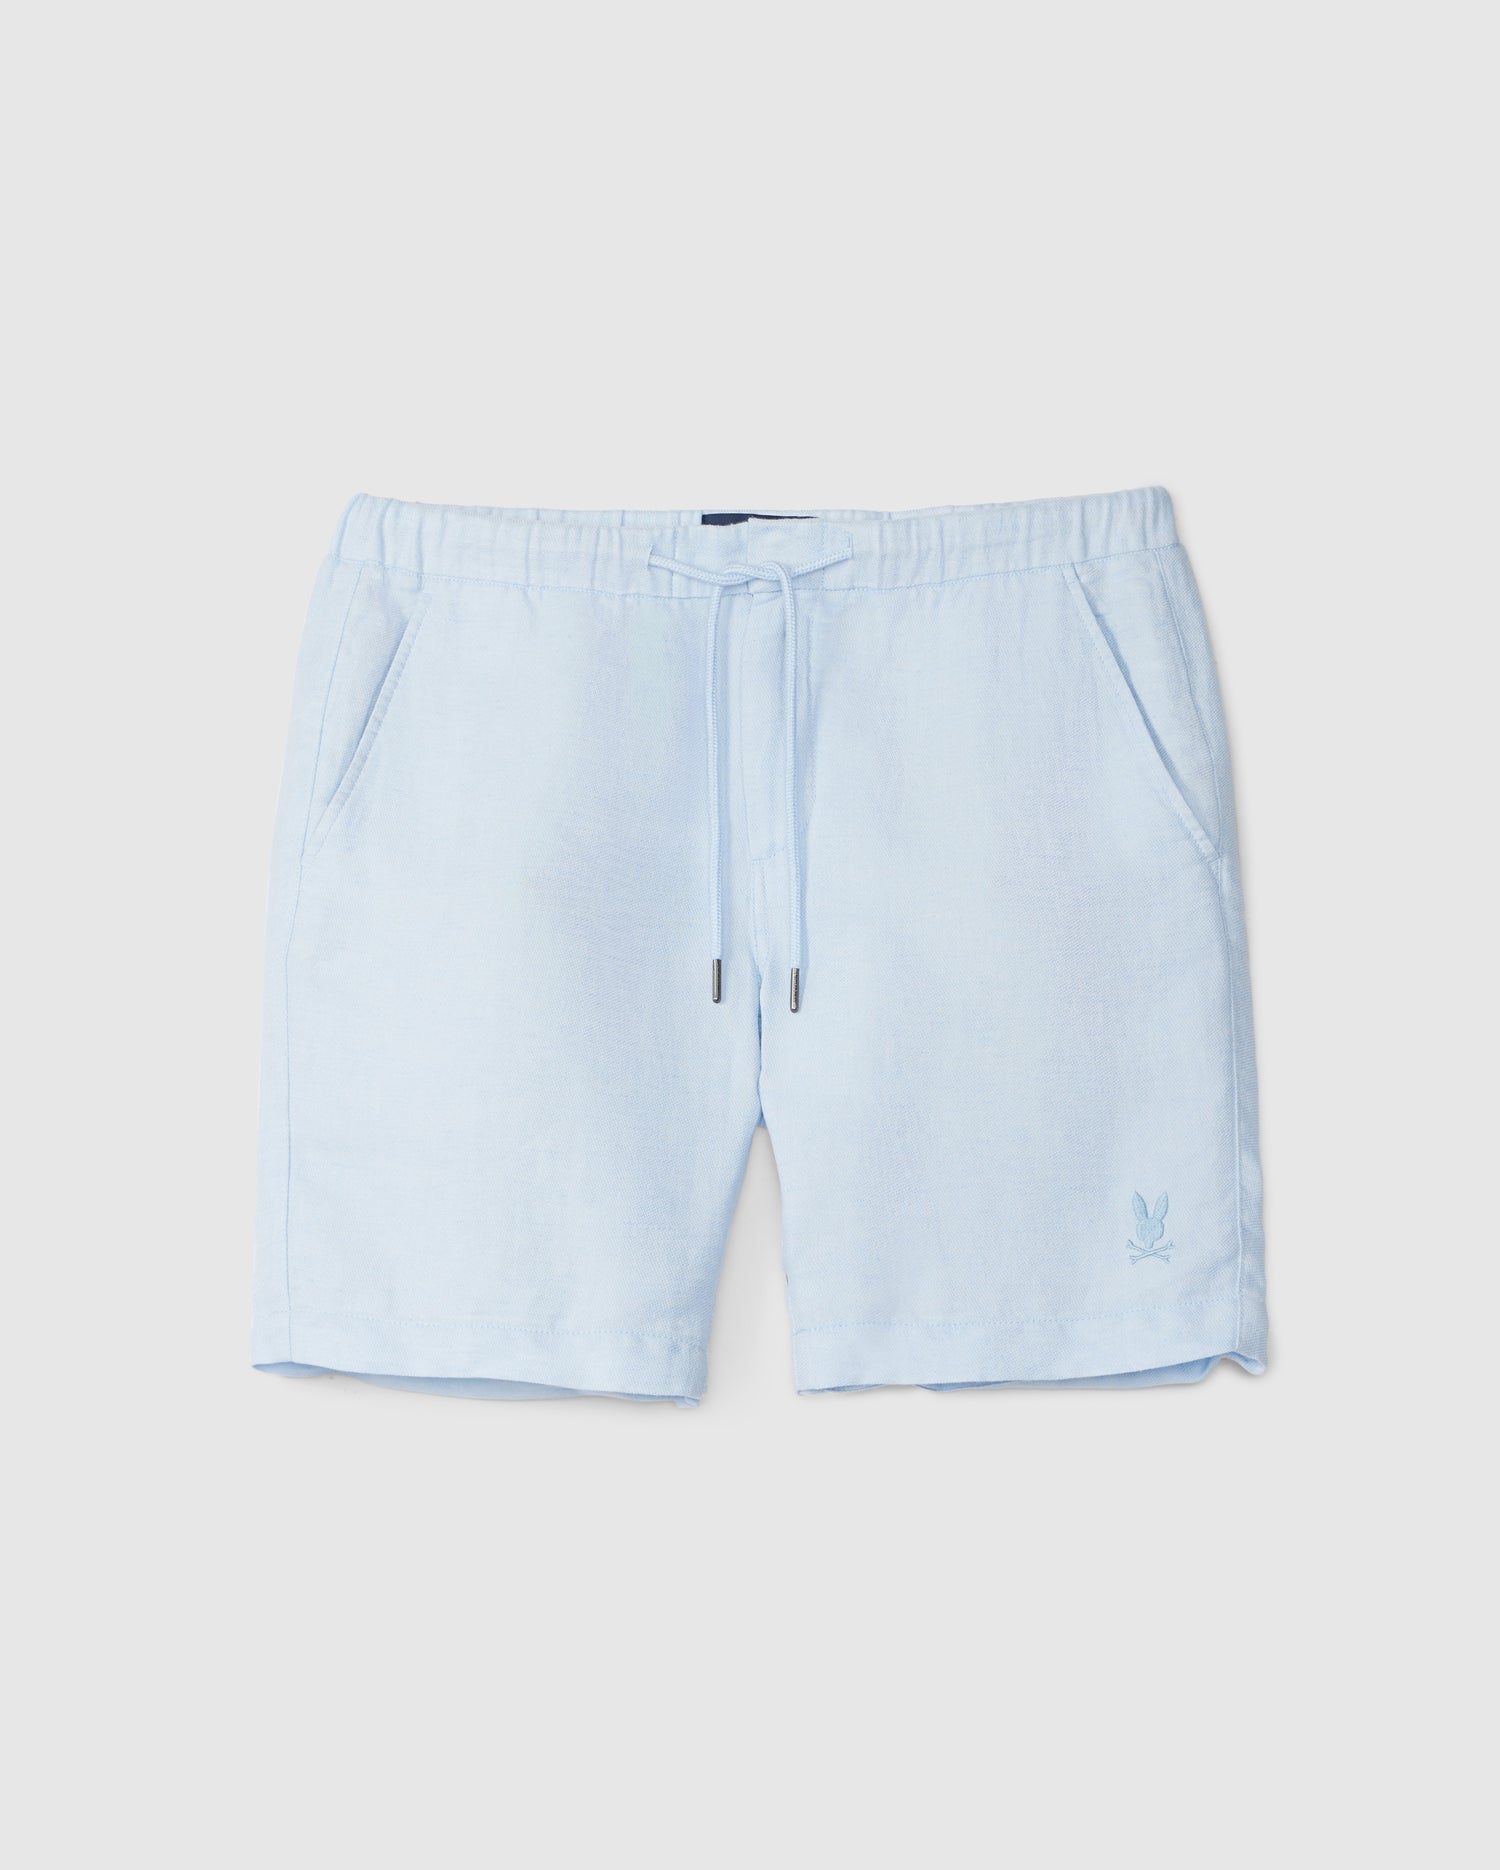 Blue Psycho Bunny shorts crafted from a breathable fabric with a drawstring waist and a small logo on the left leg, displayed against a plain white background.